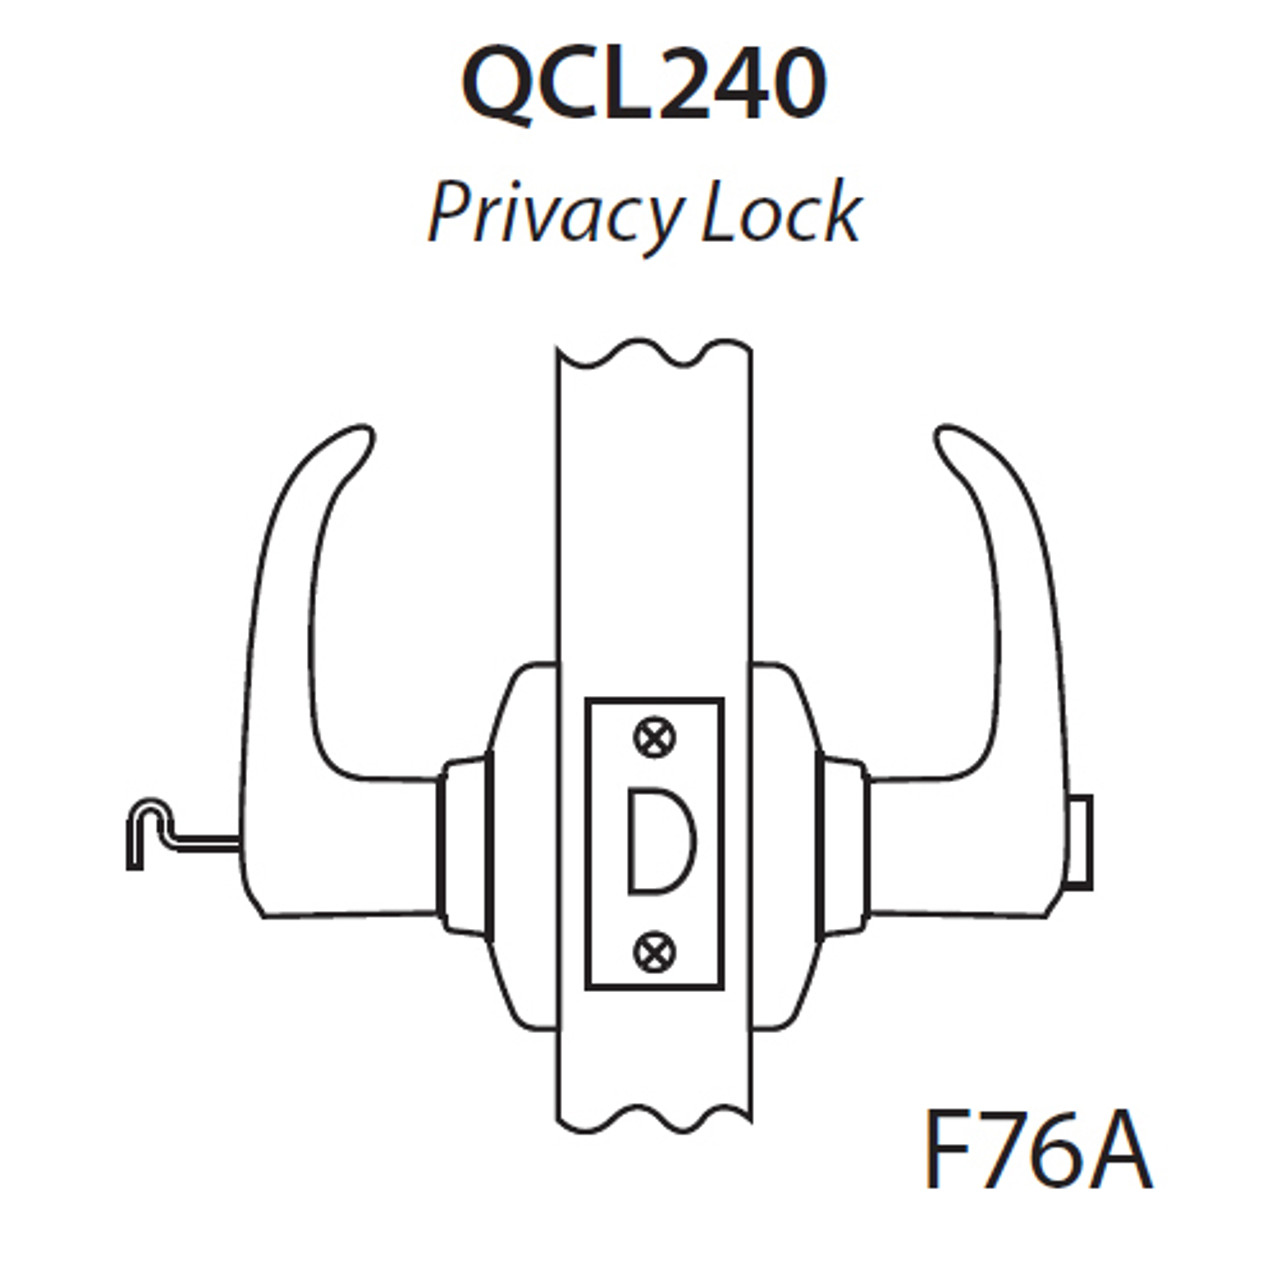 QCL240M613NOL478S Stanley QCL200 Series Cylindrical Privacy Lock with Summit Lever in Oil Rubbed Bronze